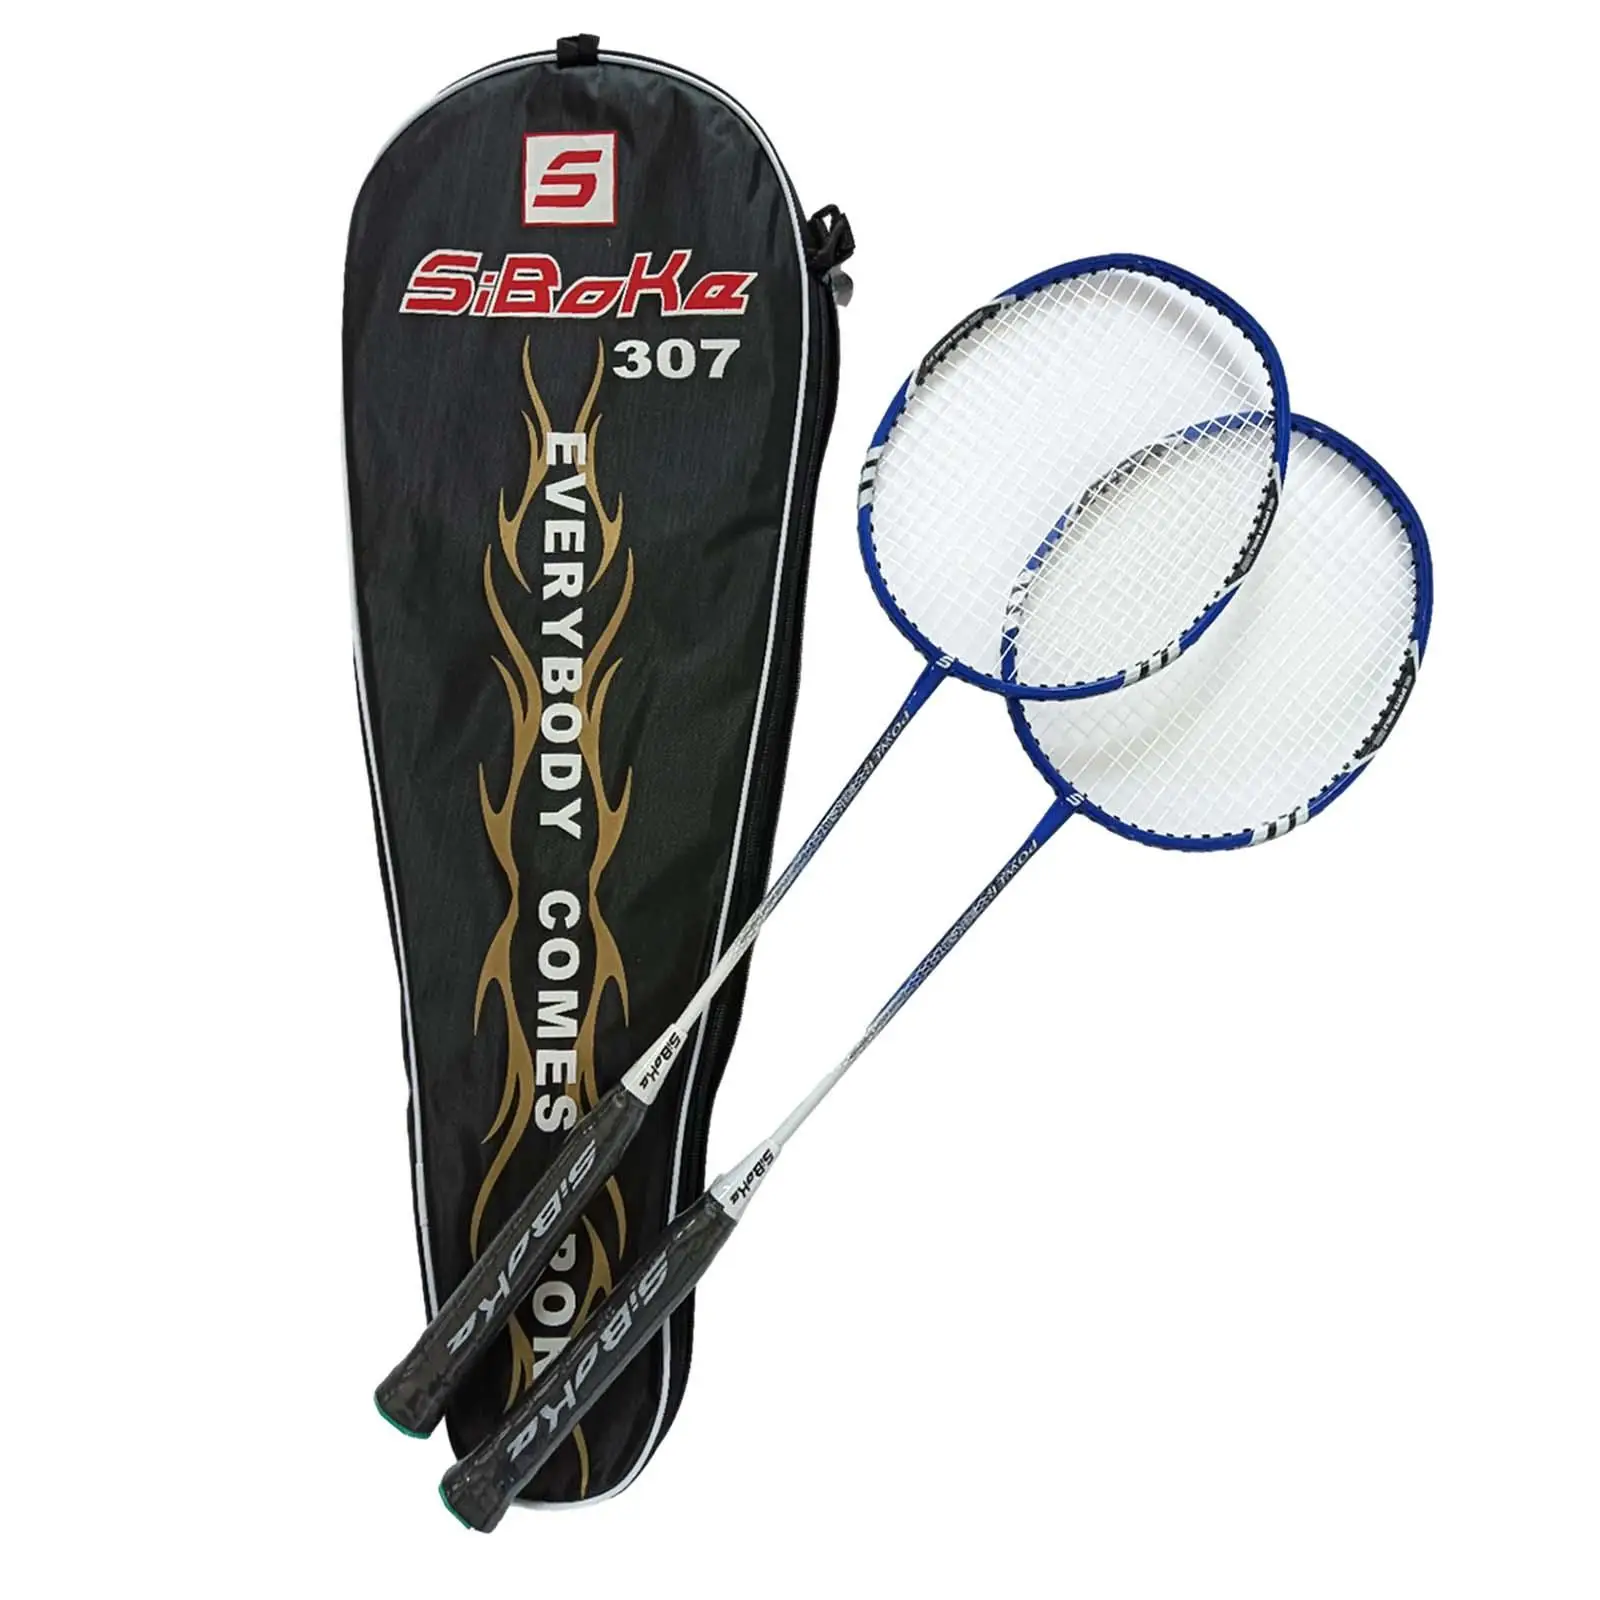 Set of 2 Badminton Rackets, Professional Badminton Rackets with Carrying Bag,